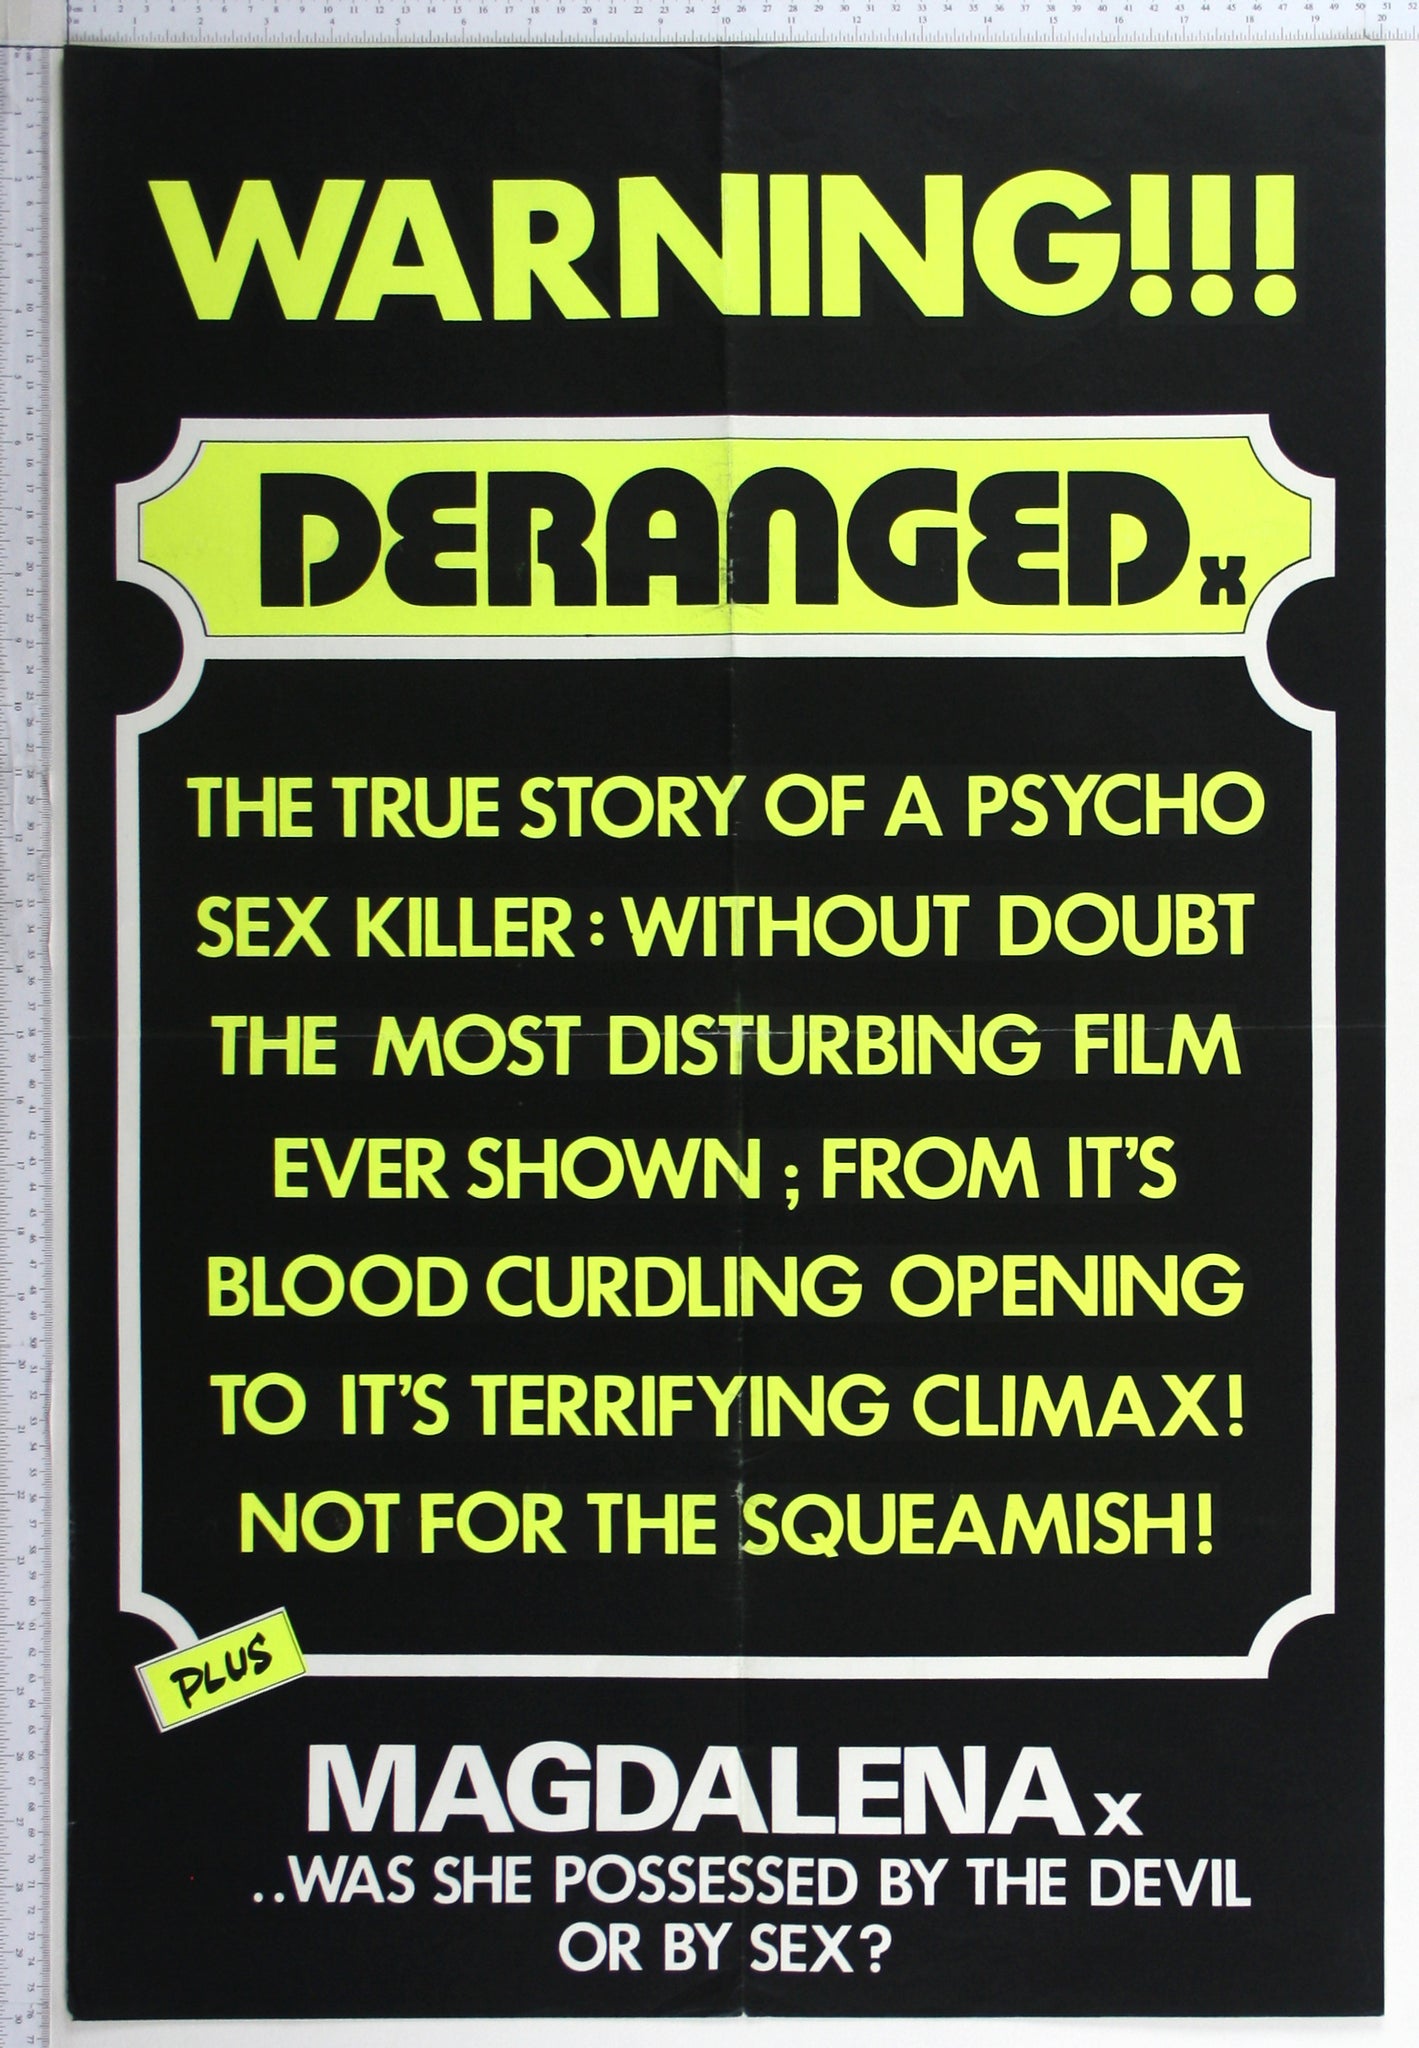 Deranged yellow text warning patrons that it is 'the most disturbing film ever shown'. Magdalena advertised at bottom.